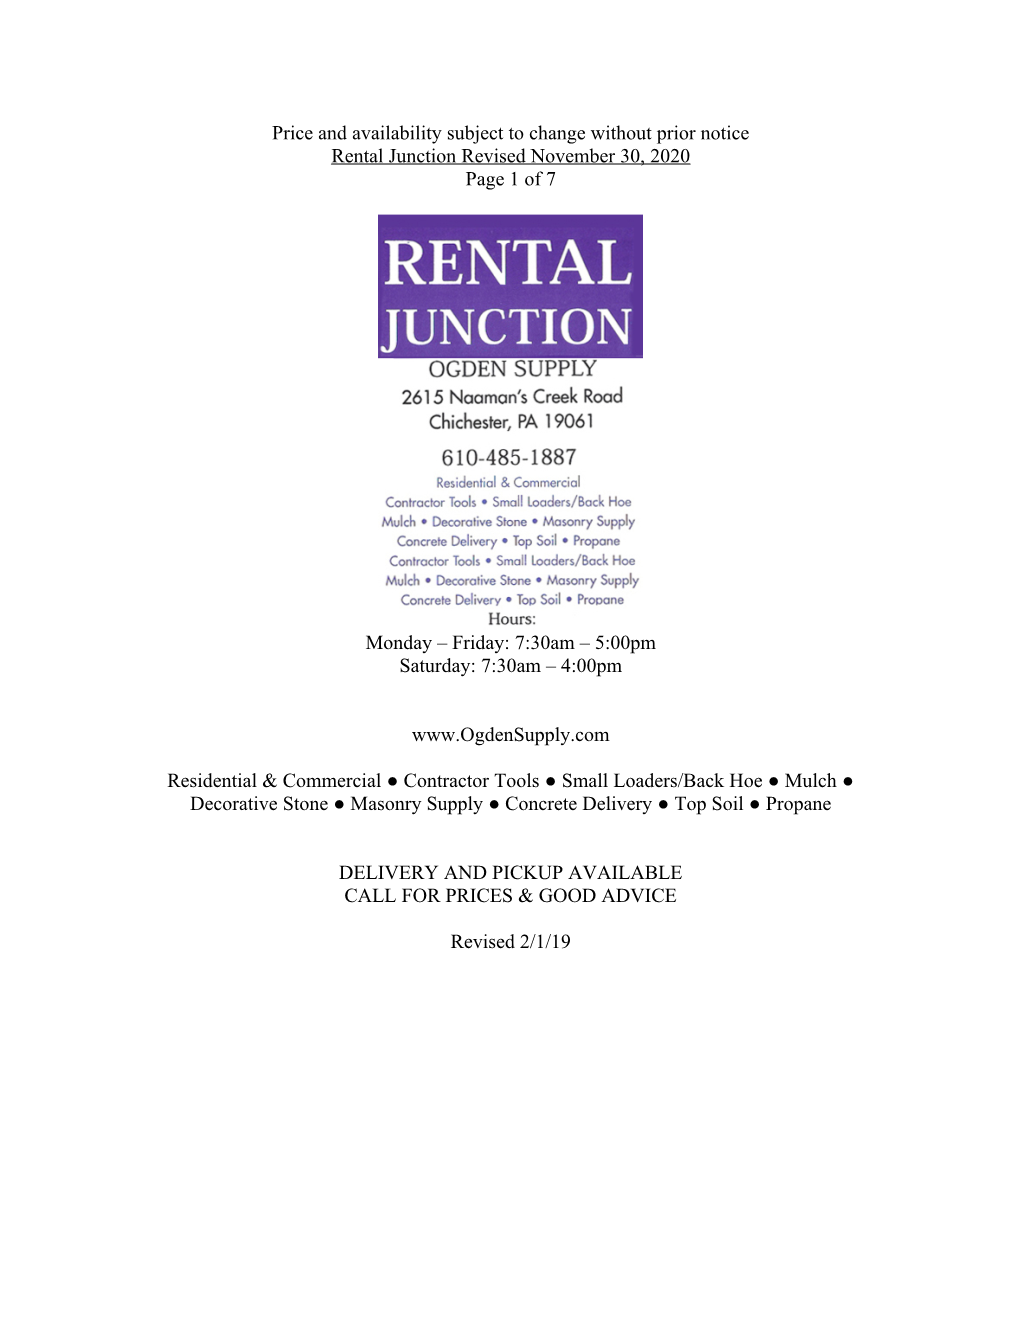 Price and Availability Subject to Change Without Prior Notice Rental Junction Revised November 30, 2020 Page 1 of 7